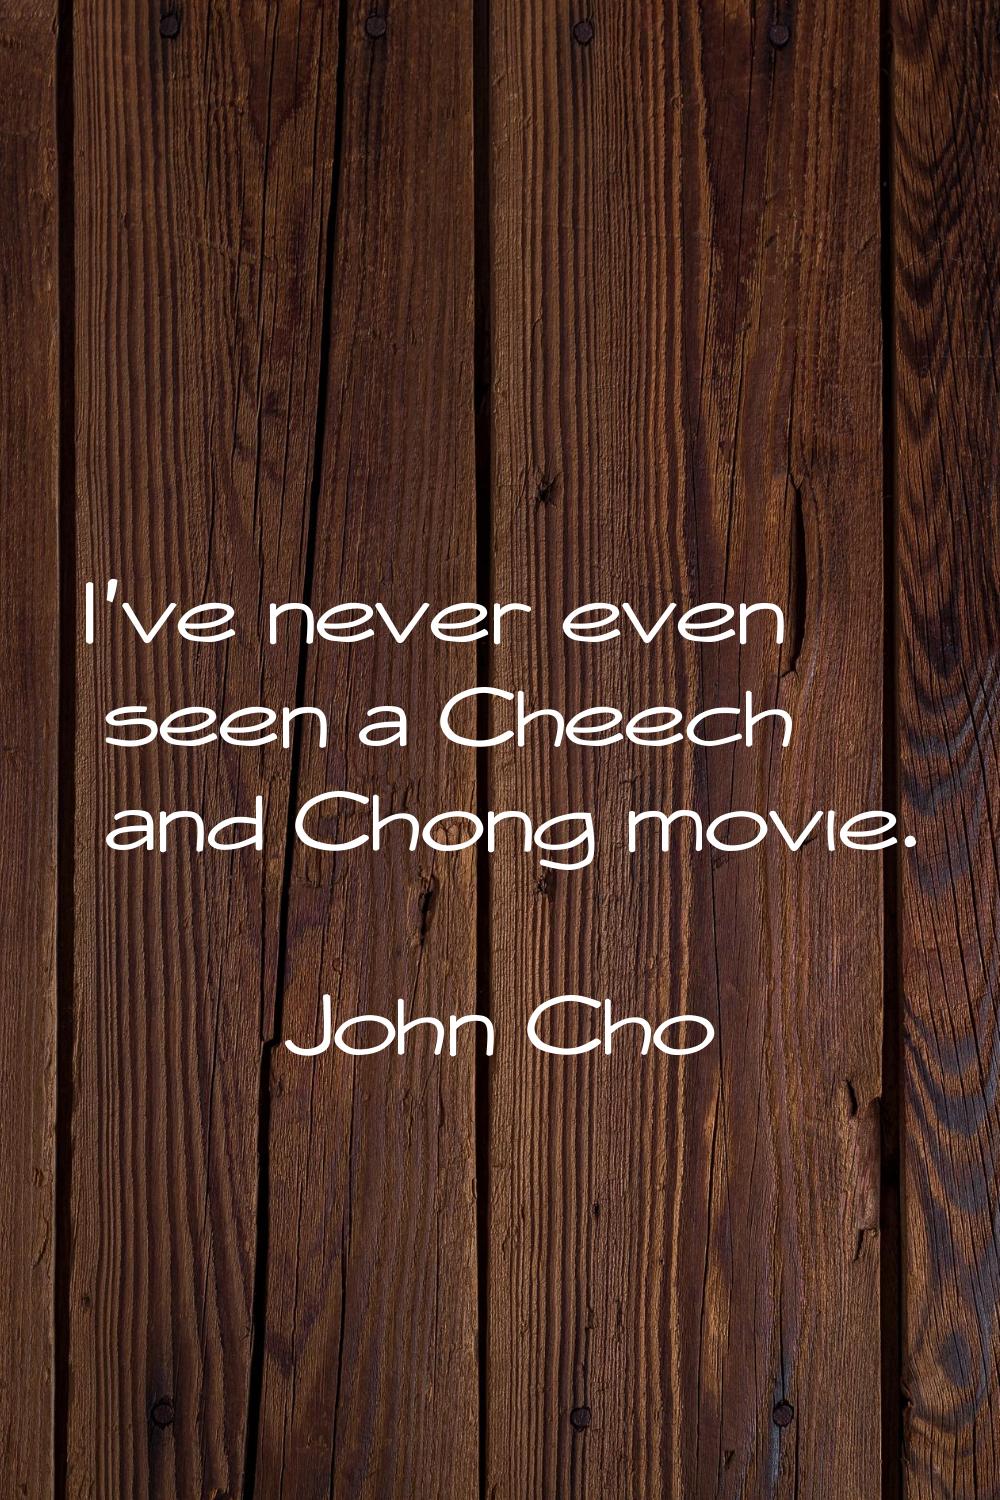 I've never even seen a Cheech and Chong movie.